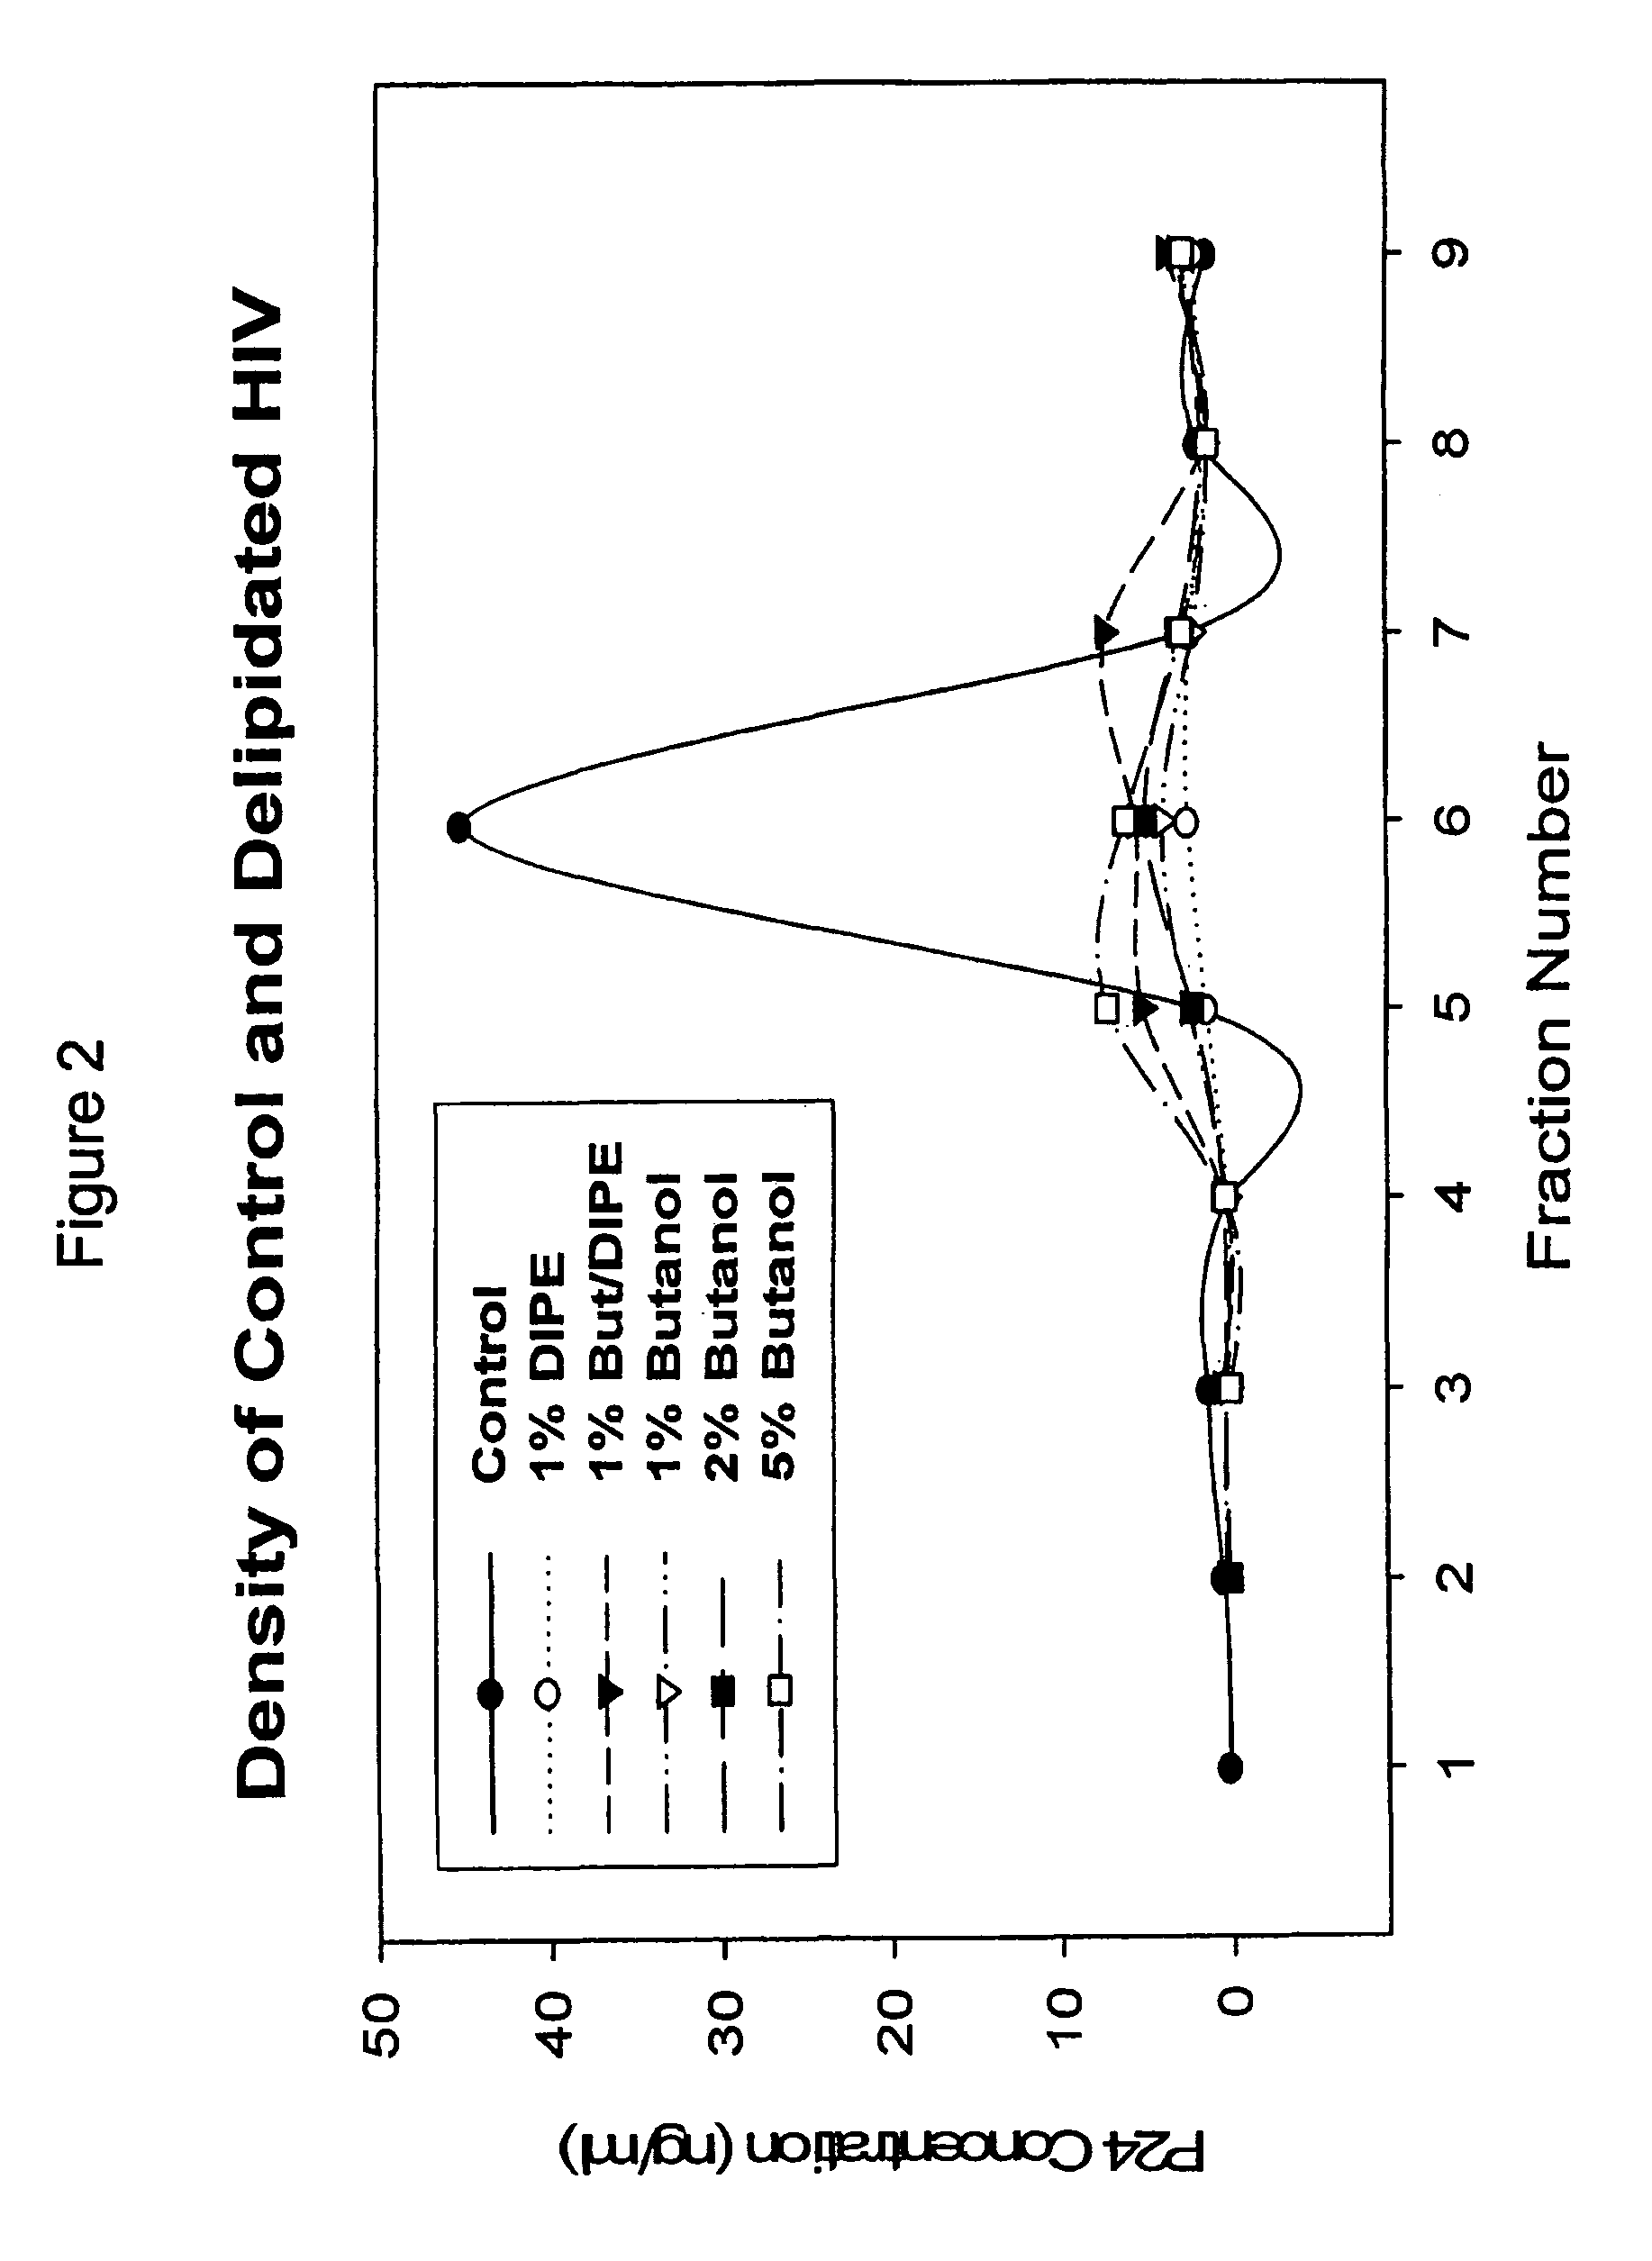 Method of making modified immunodeficiency virus particles